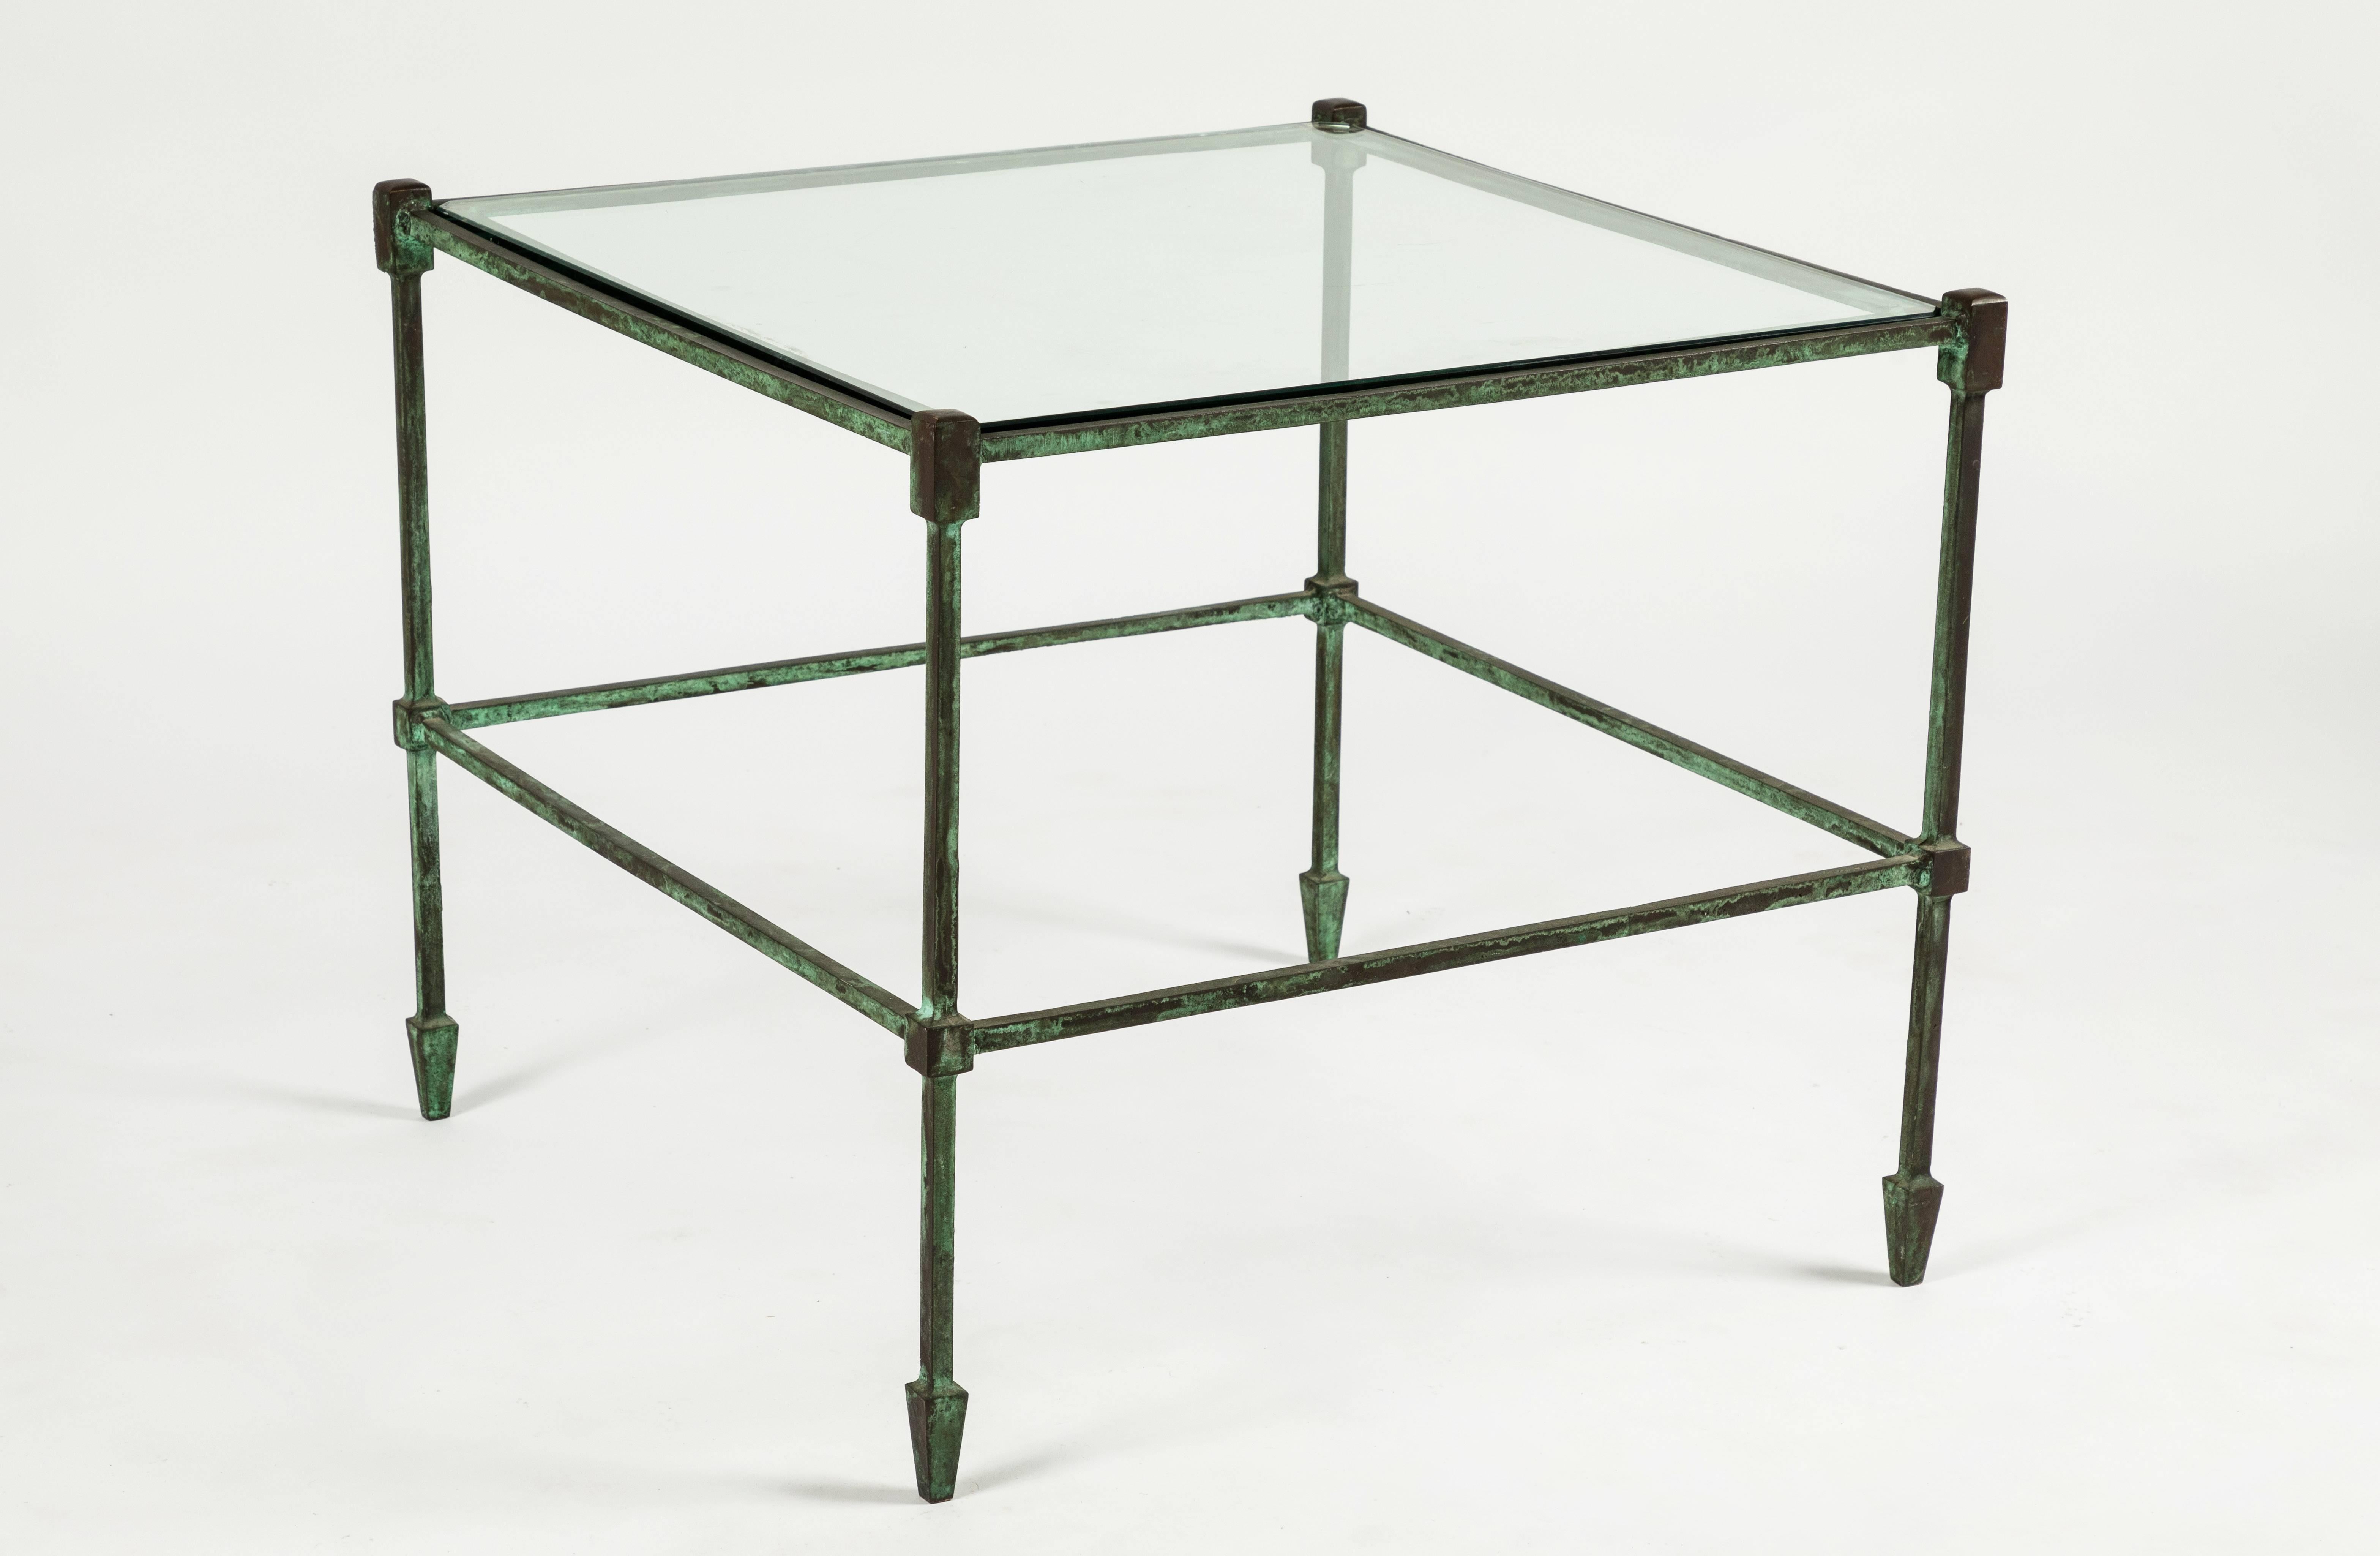 Super chic two-tired side tables featuring a patinated bronze frame with two glass shelves. Given the simplicity of the design of these tables they lend themselves to any number of interior styles. Glass appears to be original and therefore may have